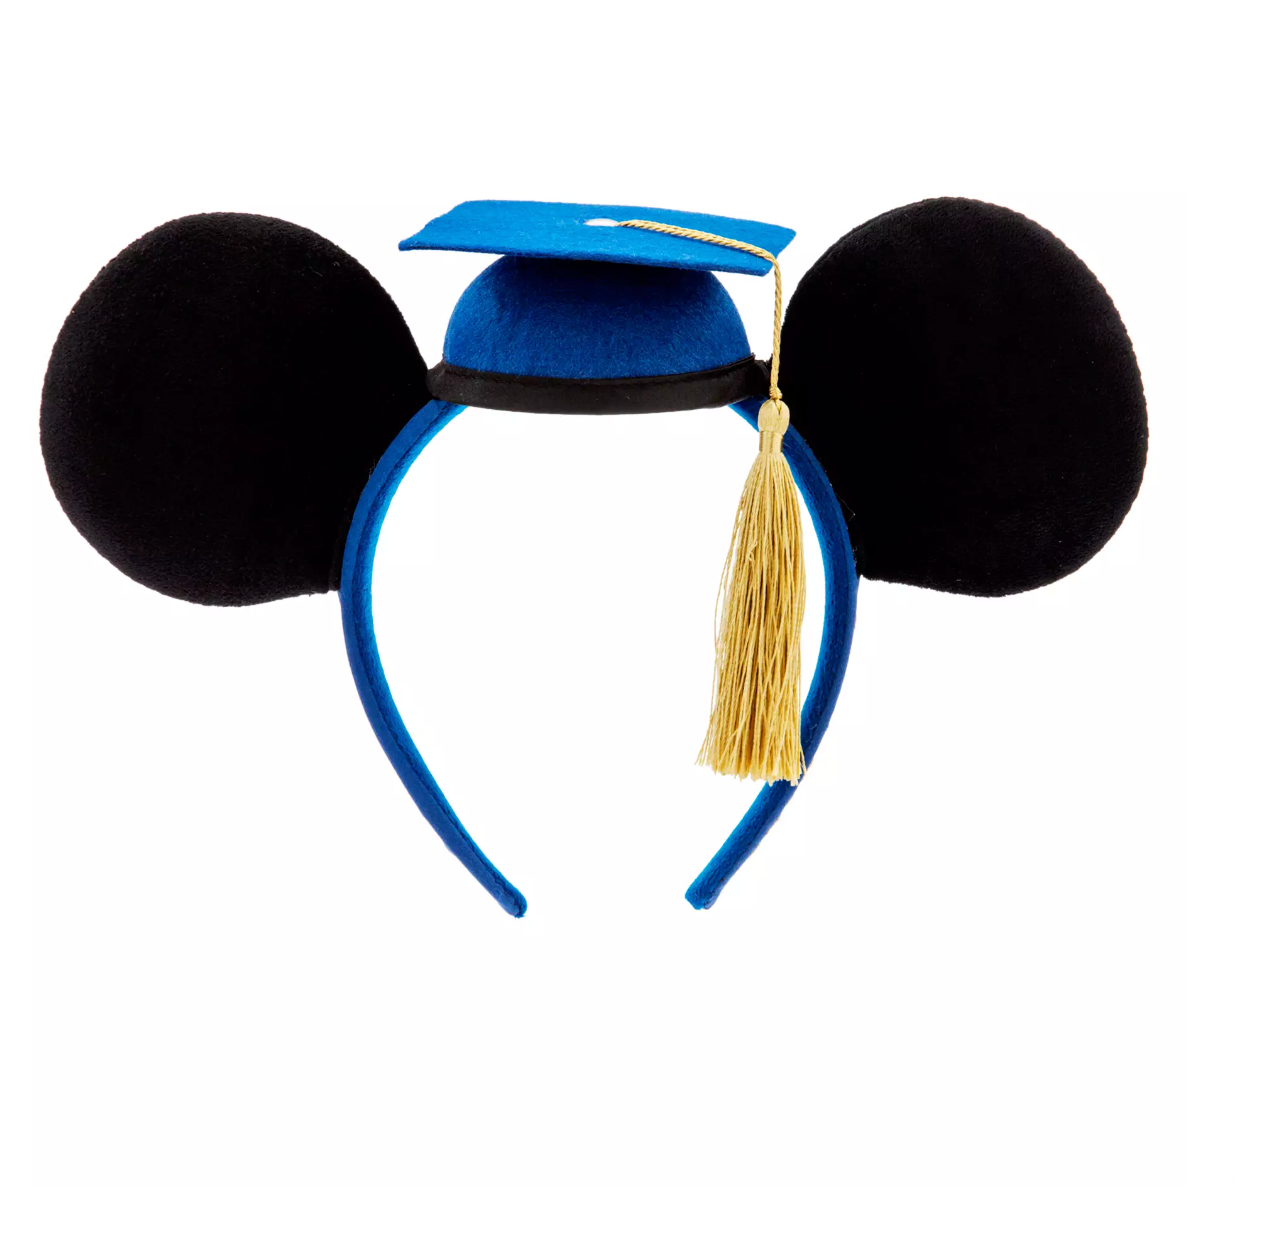 Disney Parks Class of 2023 Graduate Mickey Mouse Ear Hat Headband New With Tag